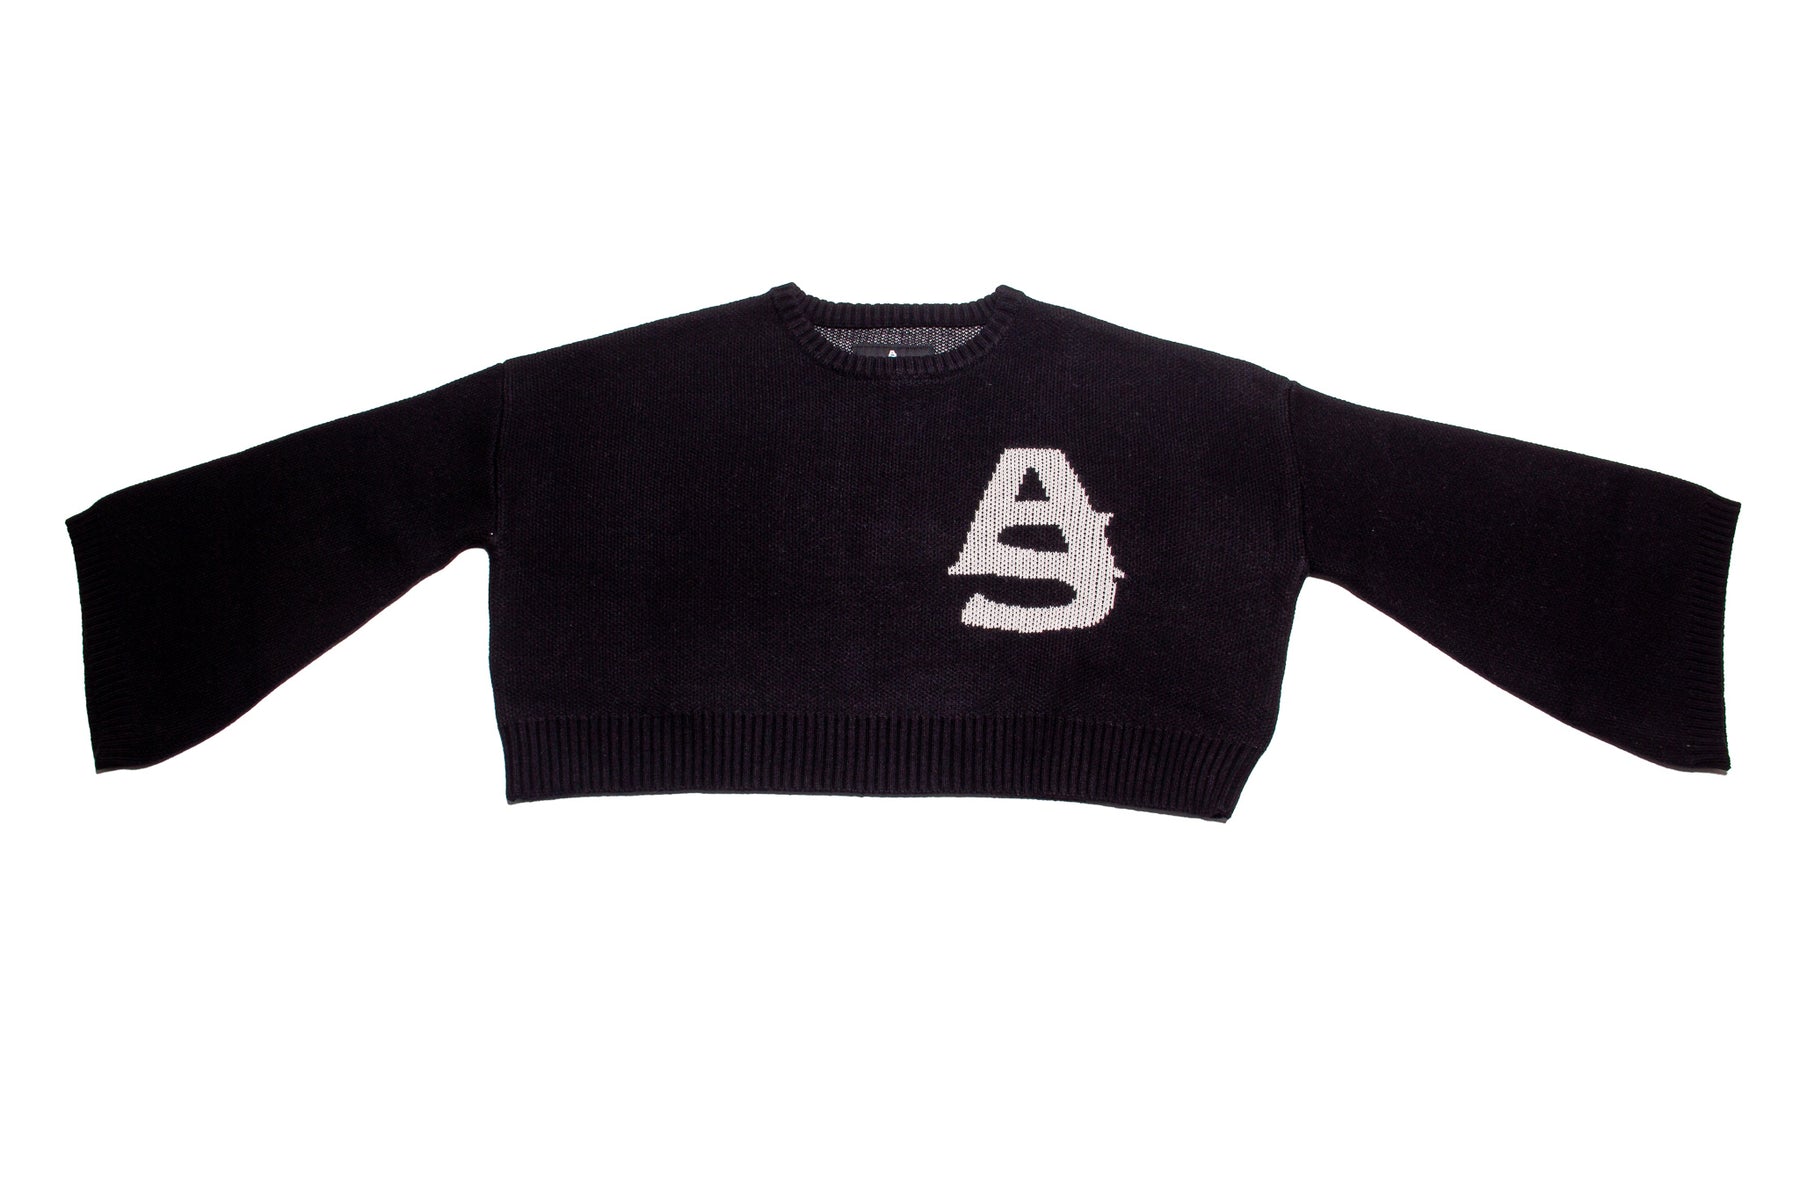 AlphaStyle Paonia Flare Sleeves Knitted Top "Black"